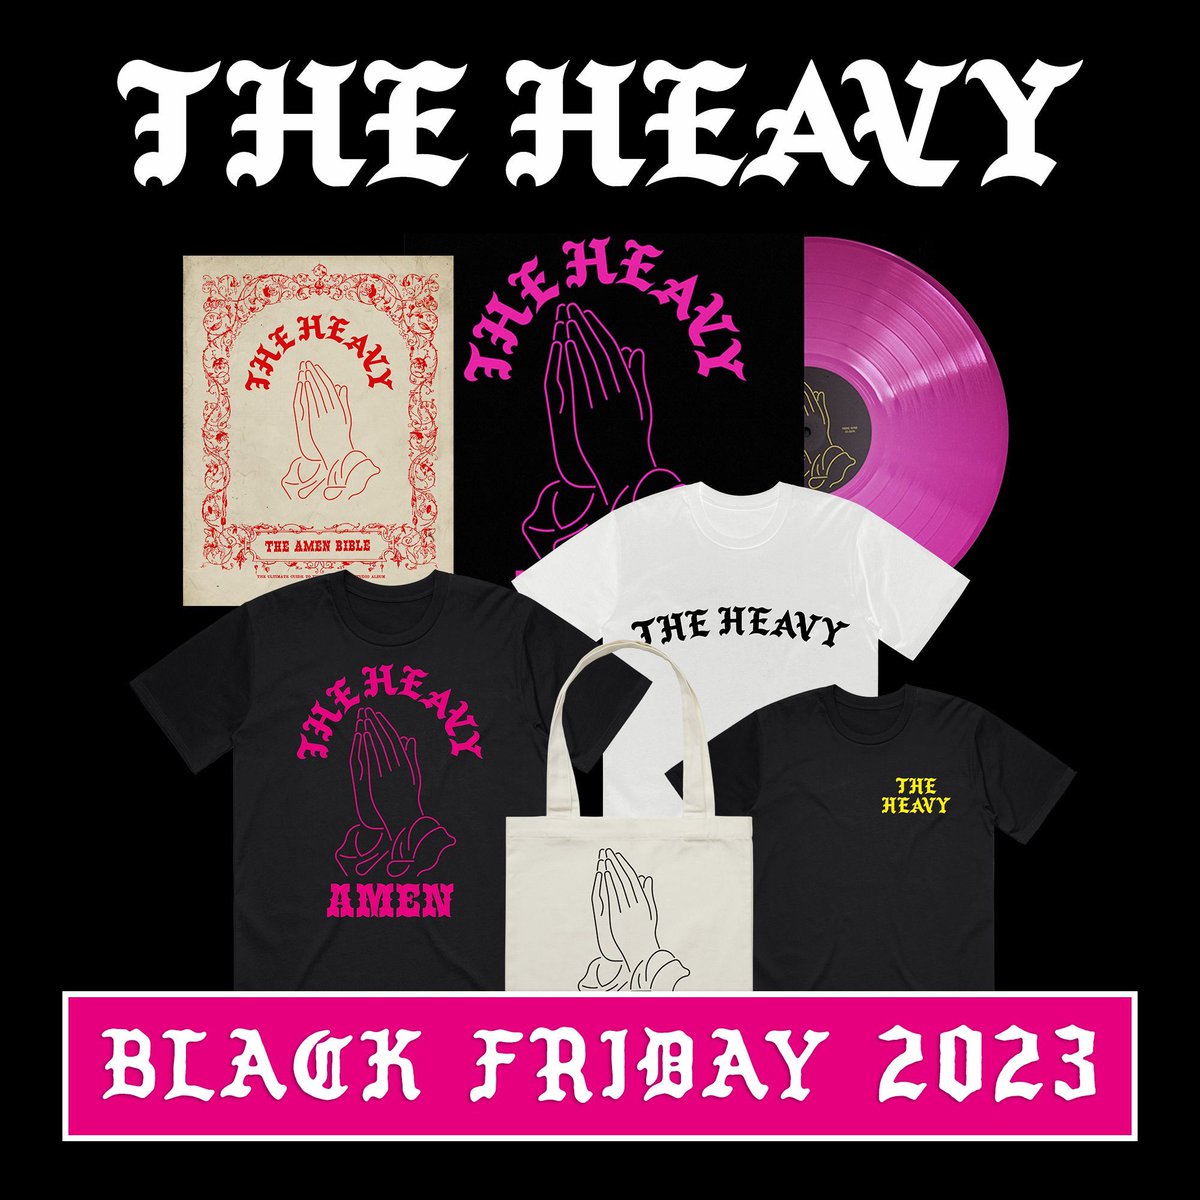 It’s nearly Black Friday, so we thought you’d treat you. For a limited time only, you can get 30% off everything - EVERYTHING - on our official online store. That’s every t-shirt, tote bag, CD, and limited edition vinyl copy of our last album, ‘AMEN’. theheavy.ochre.store